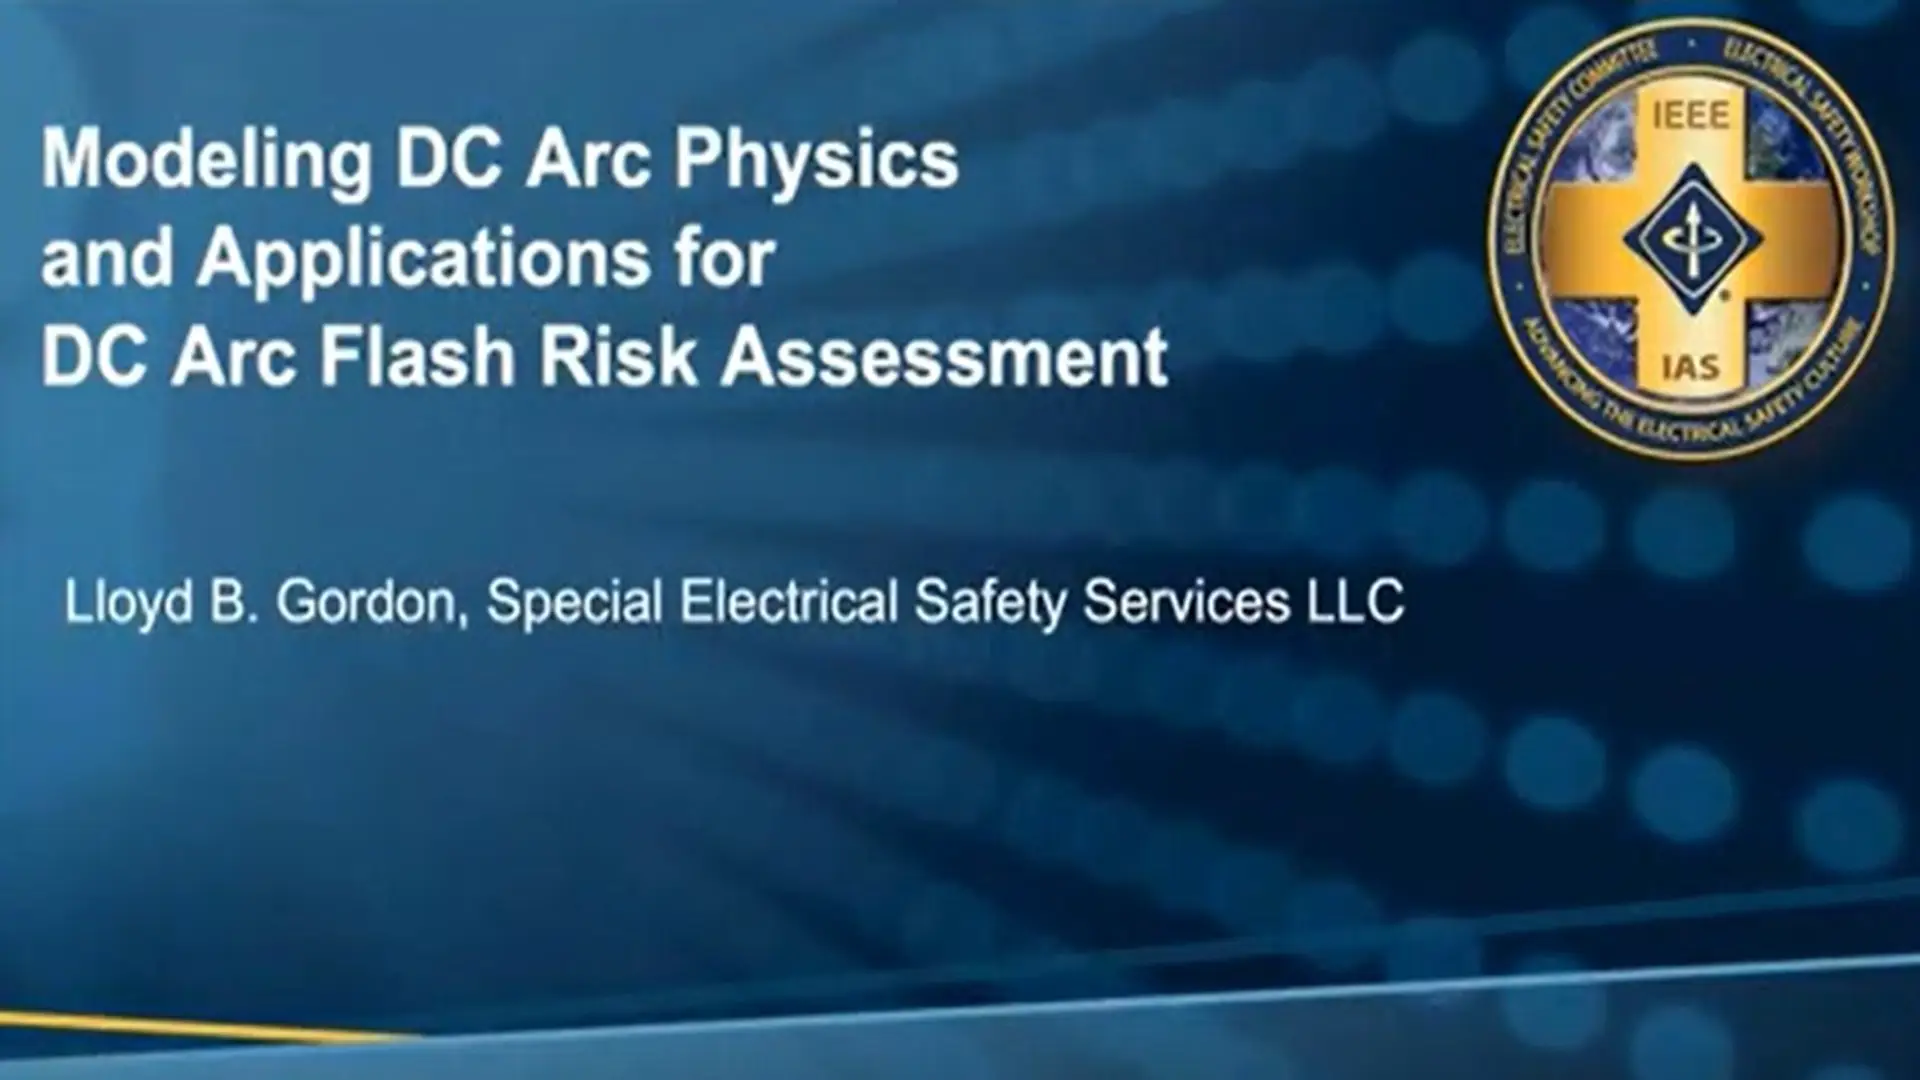 Modeling DC Arc Physics and Applications for DC Arc Flash Risk Assessment